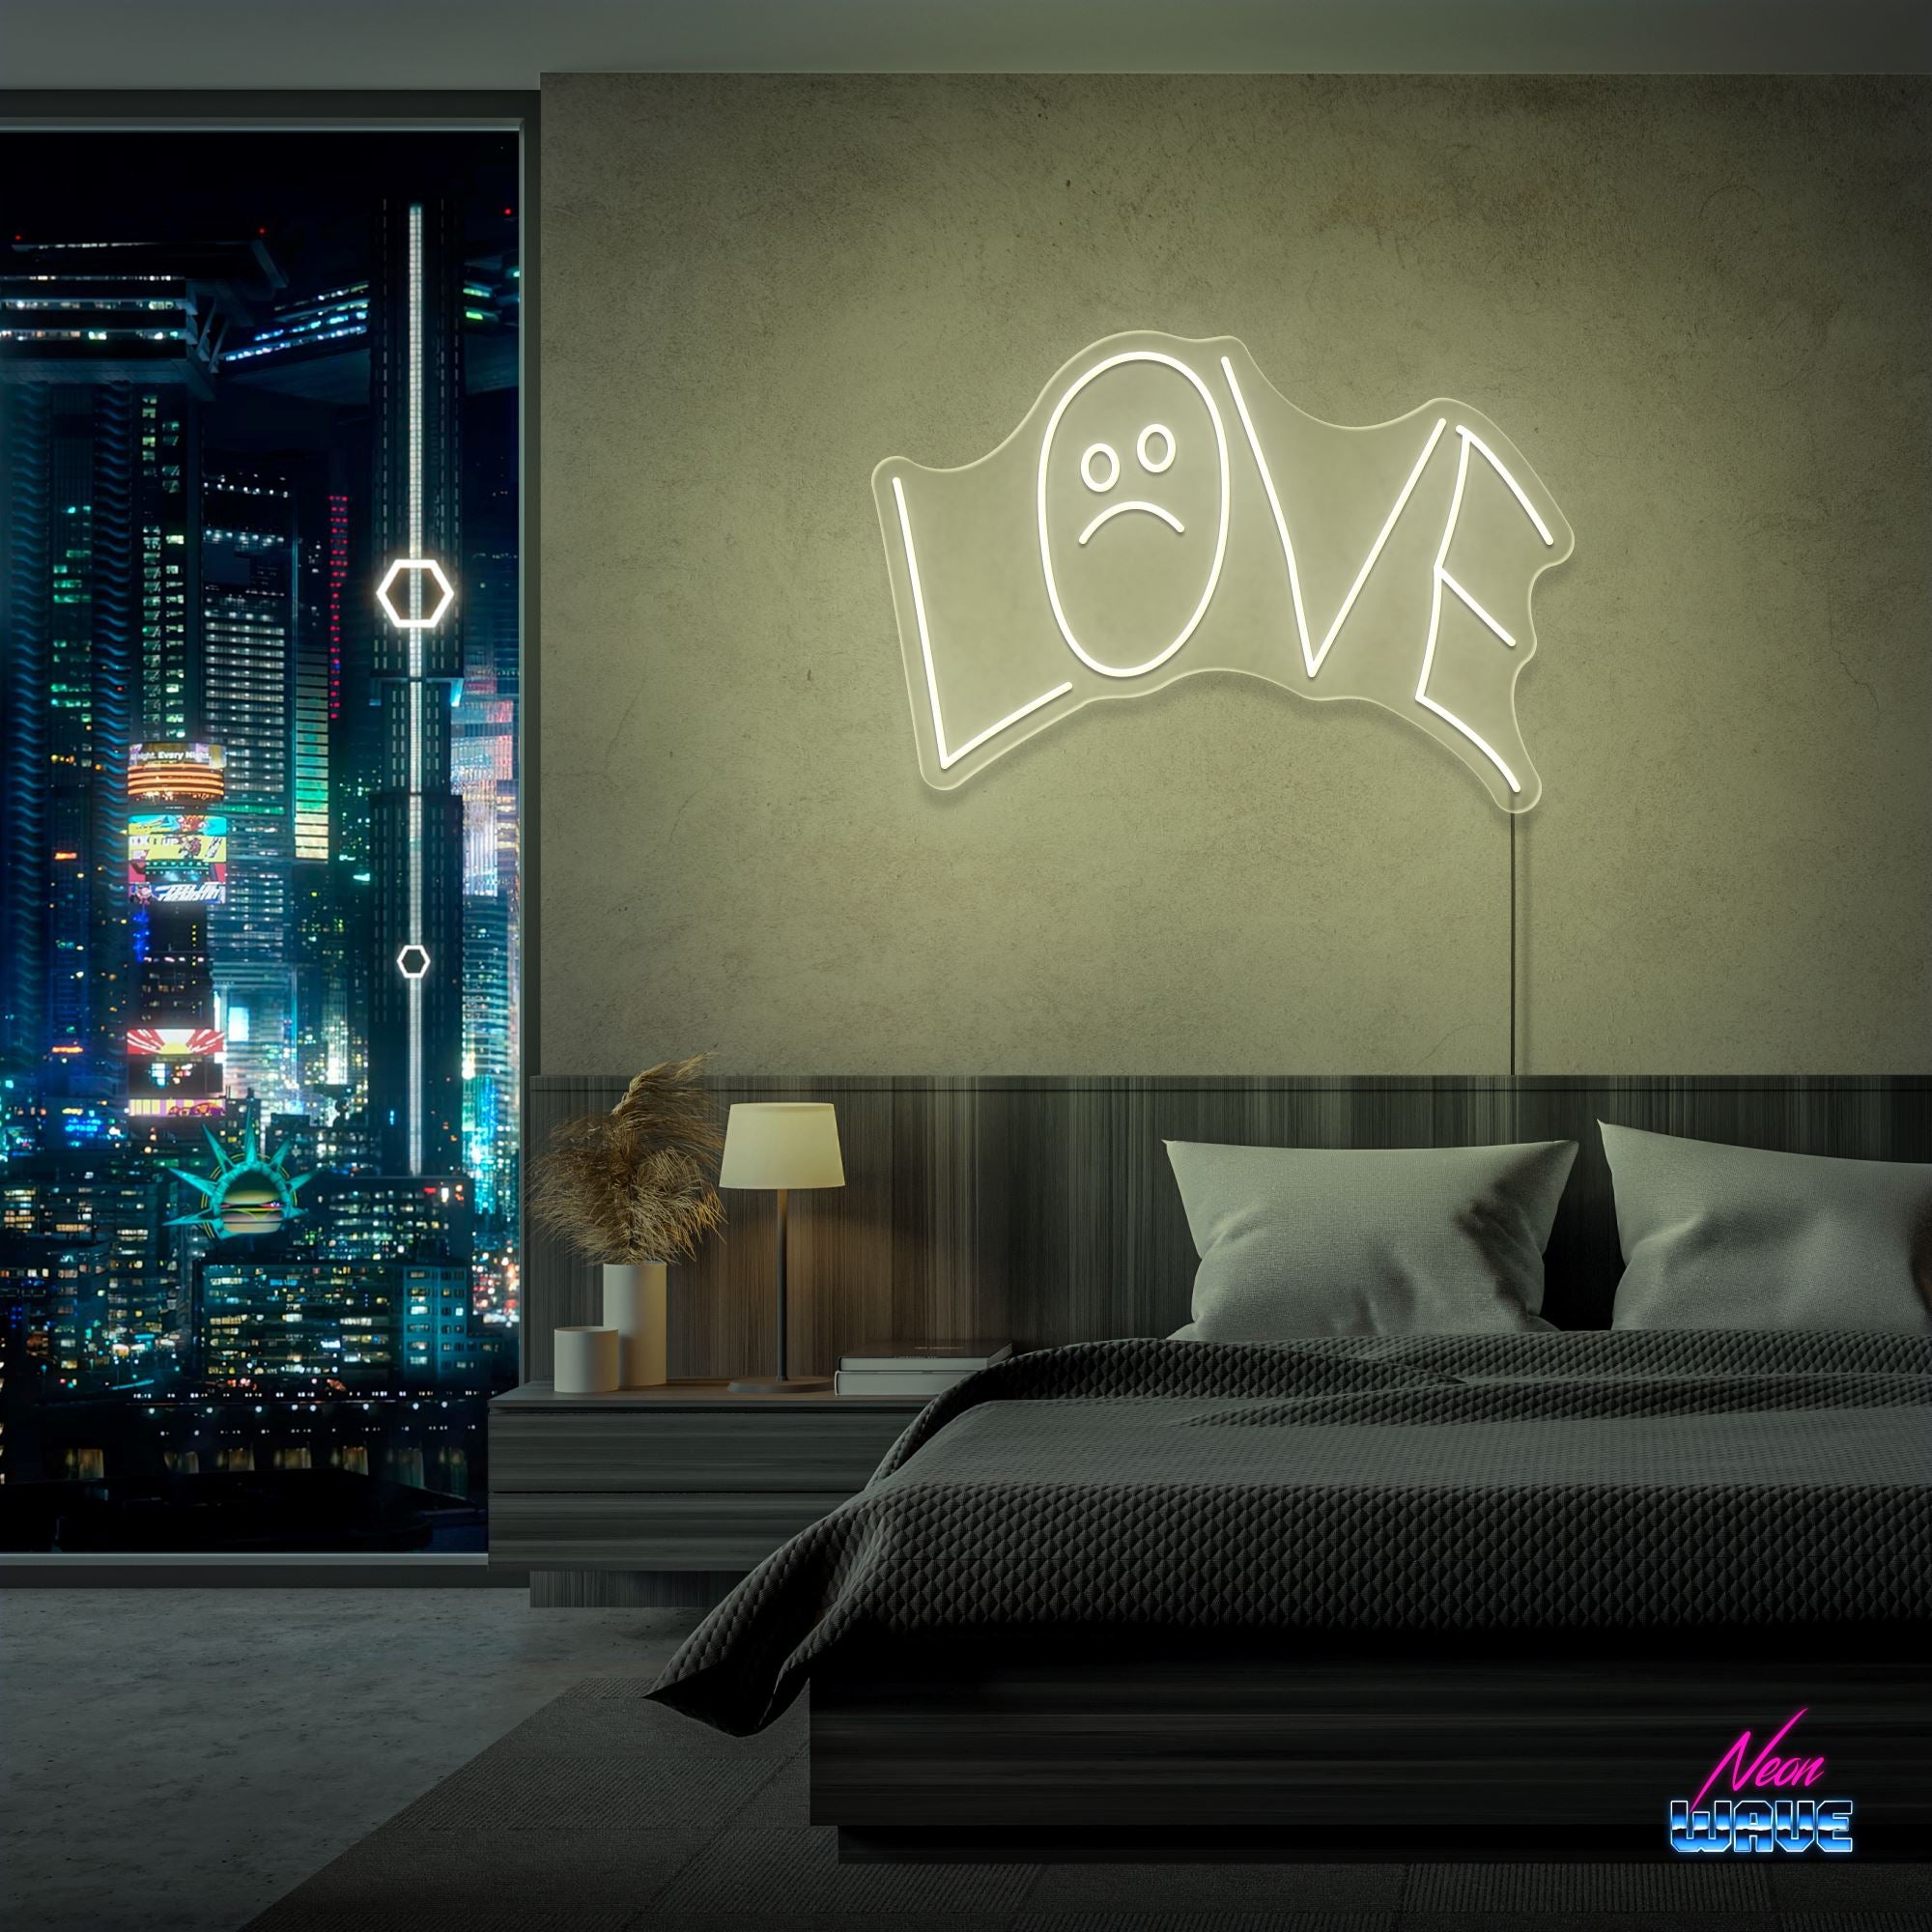 LOVE :( by "Lil Peep" Neon Sign Neonwave.ch 50cm Warmweiss 